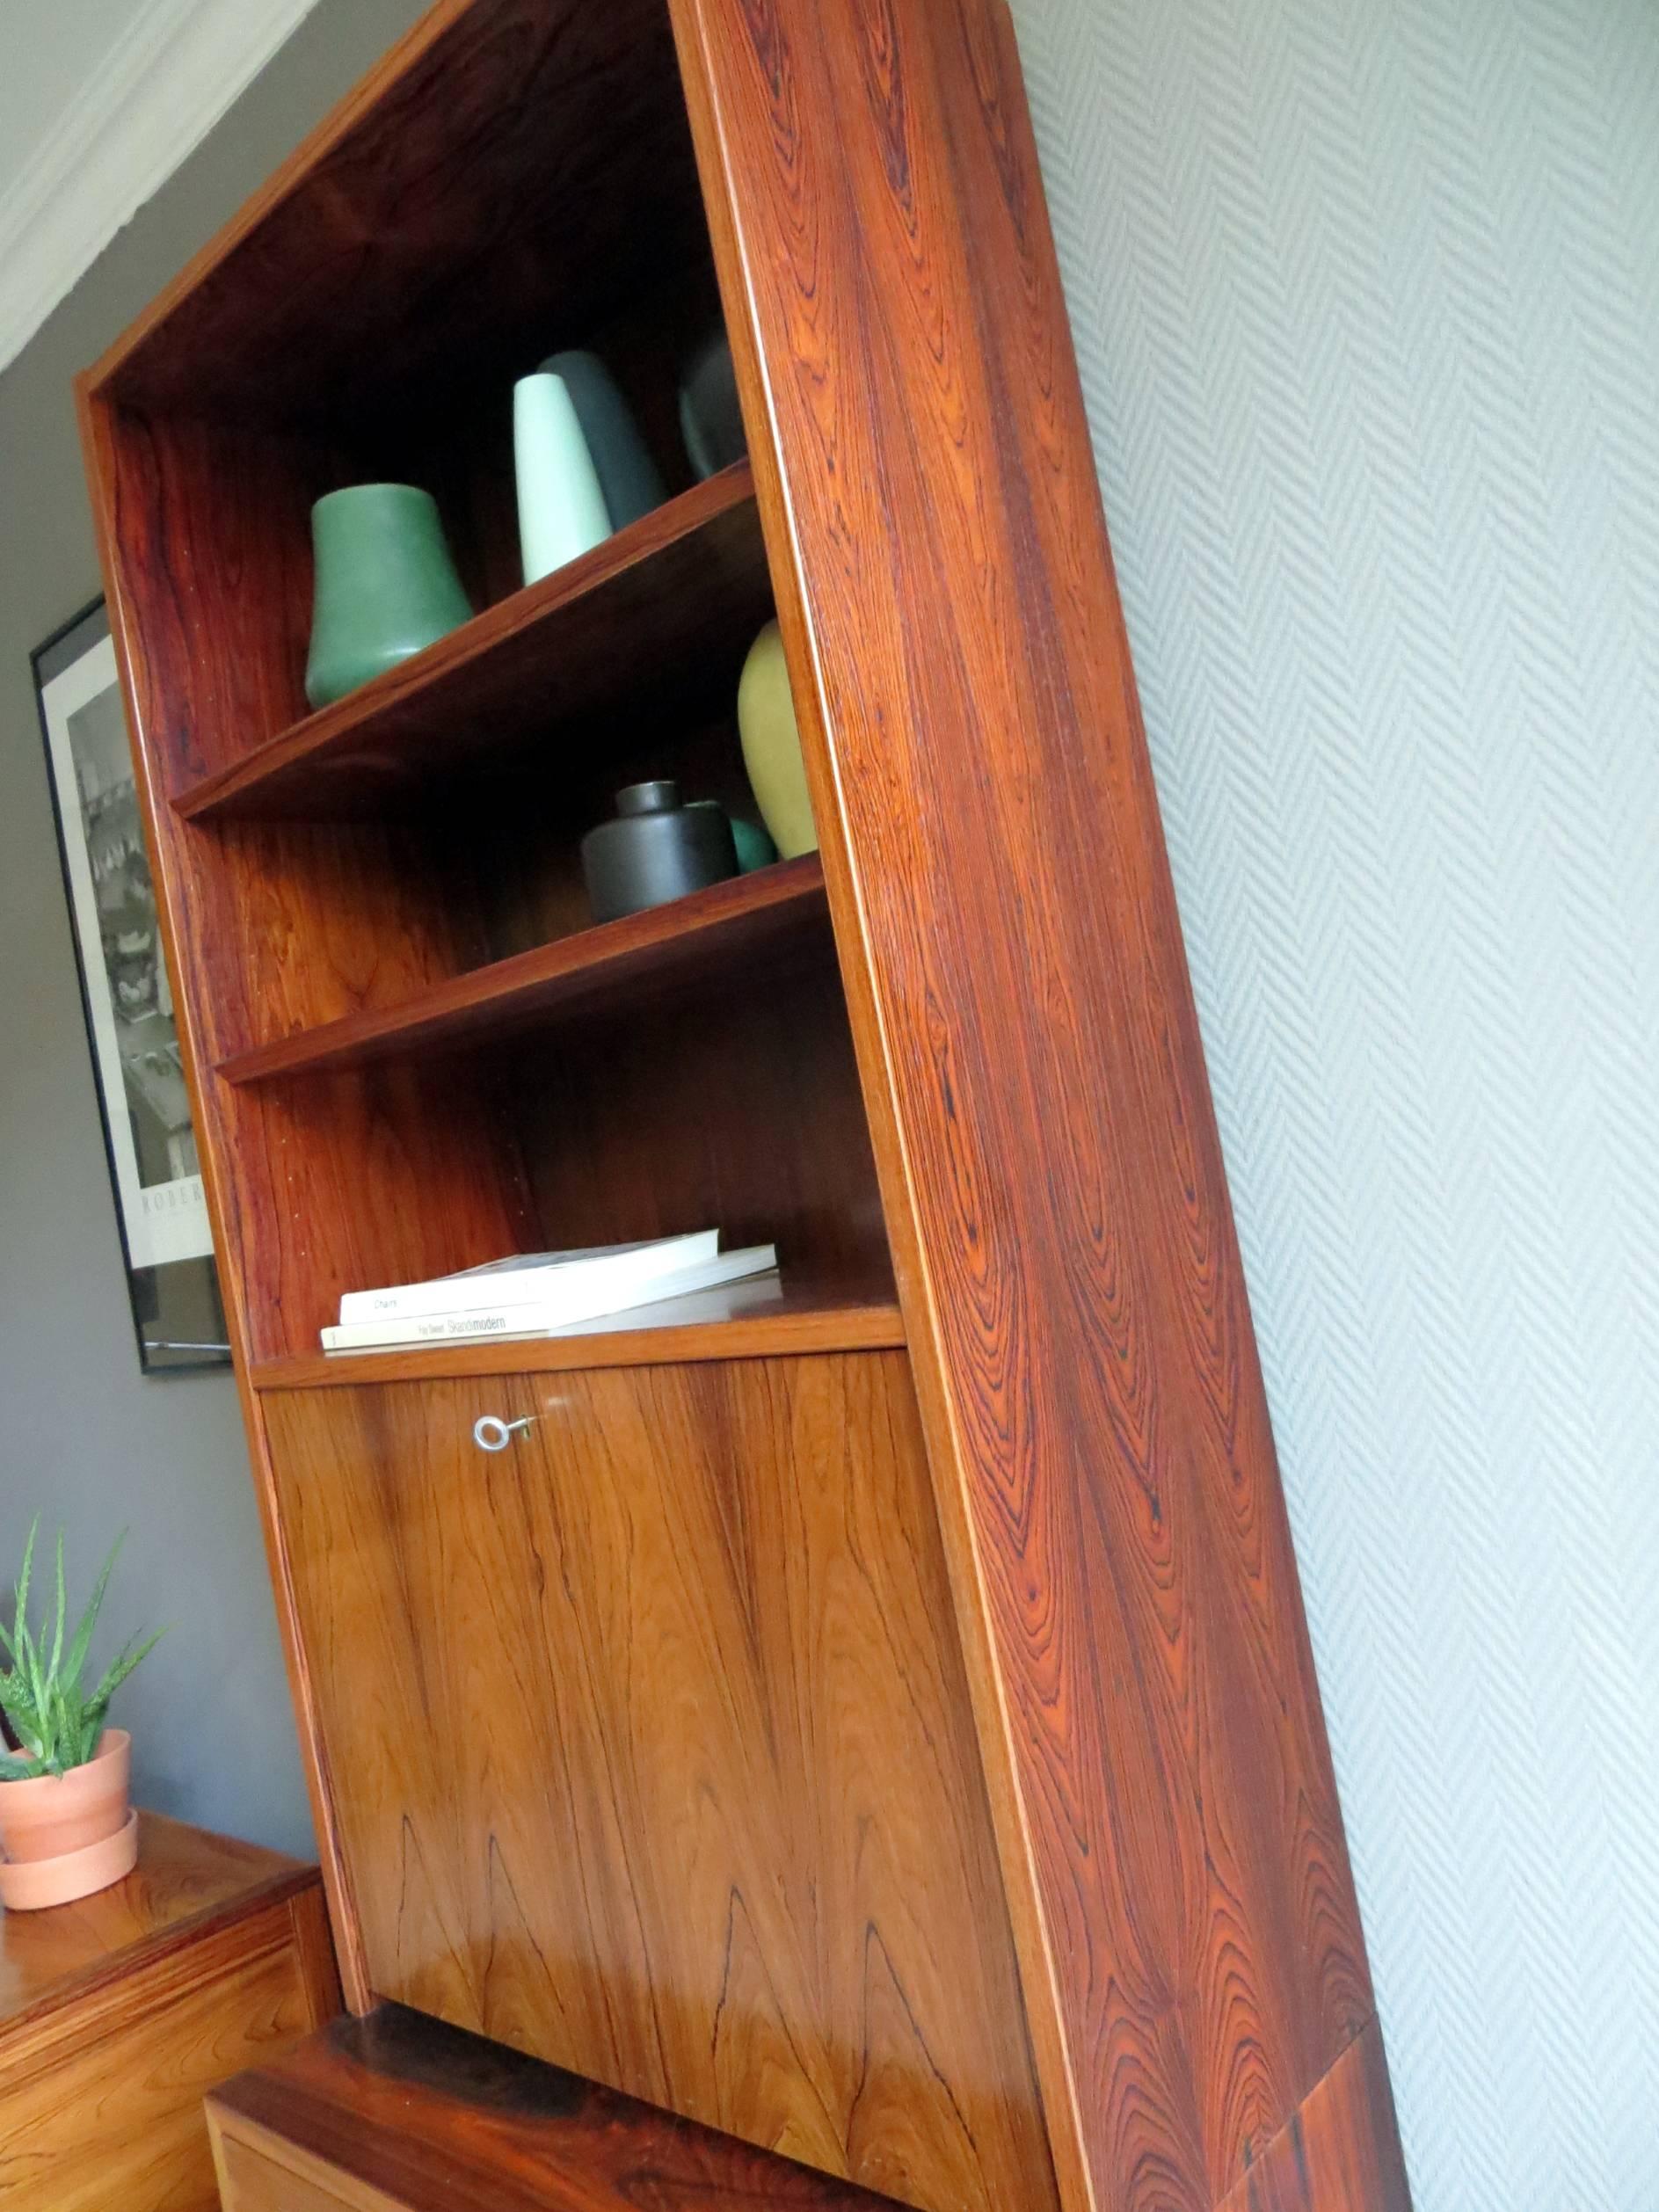 Poul Hundevad Rio Rosewood Wall Unit and Cabinet Danish Midcentury , 1960s For Sale 1